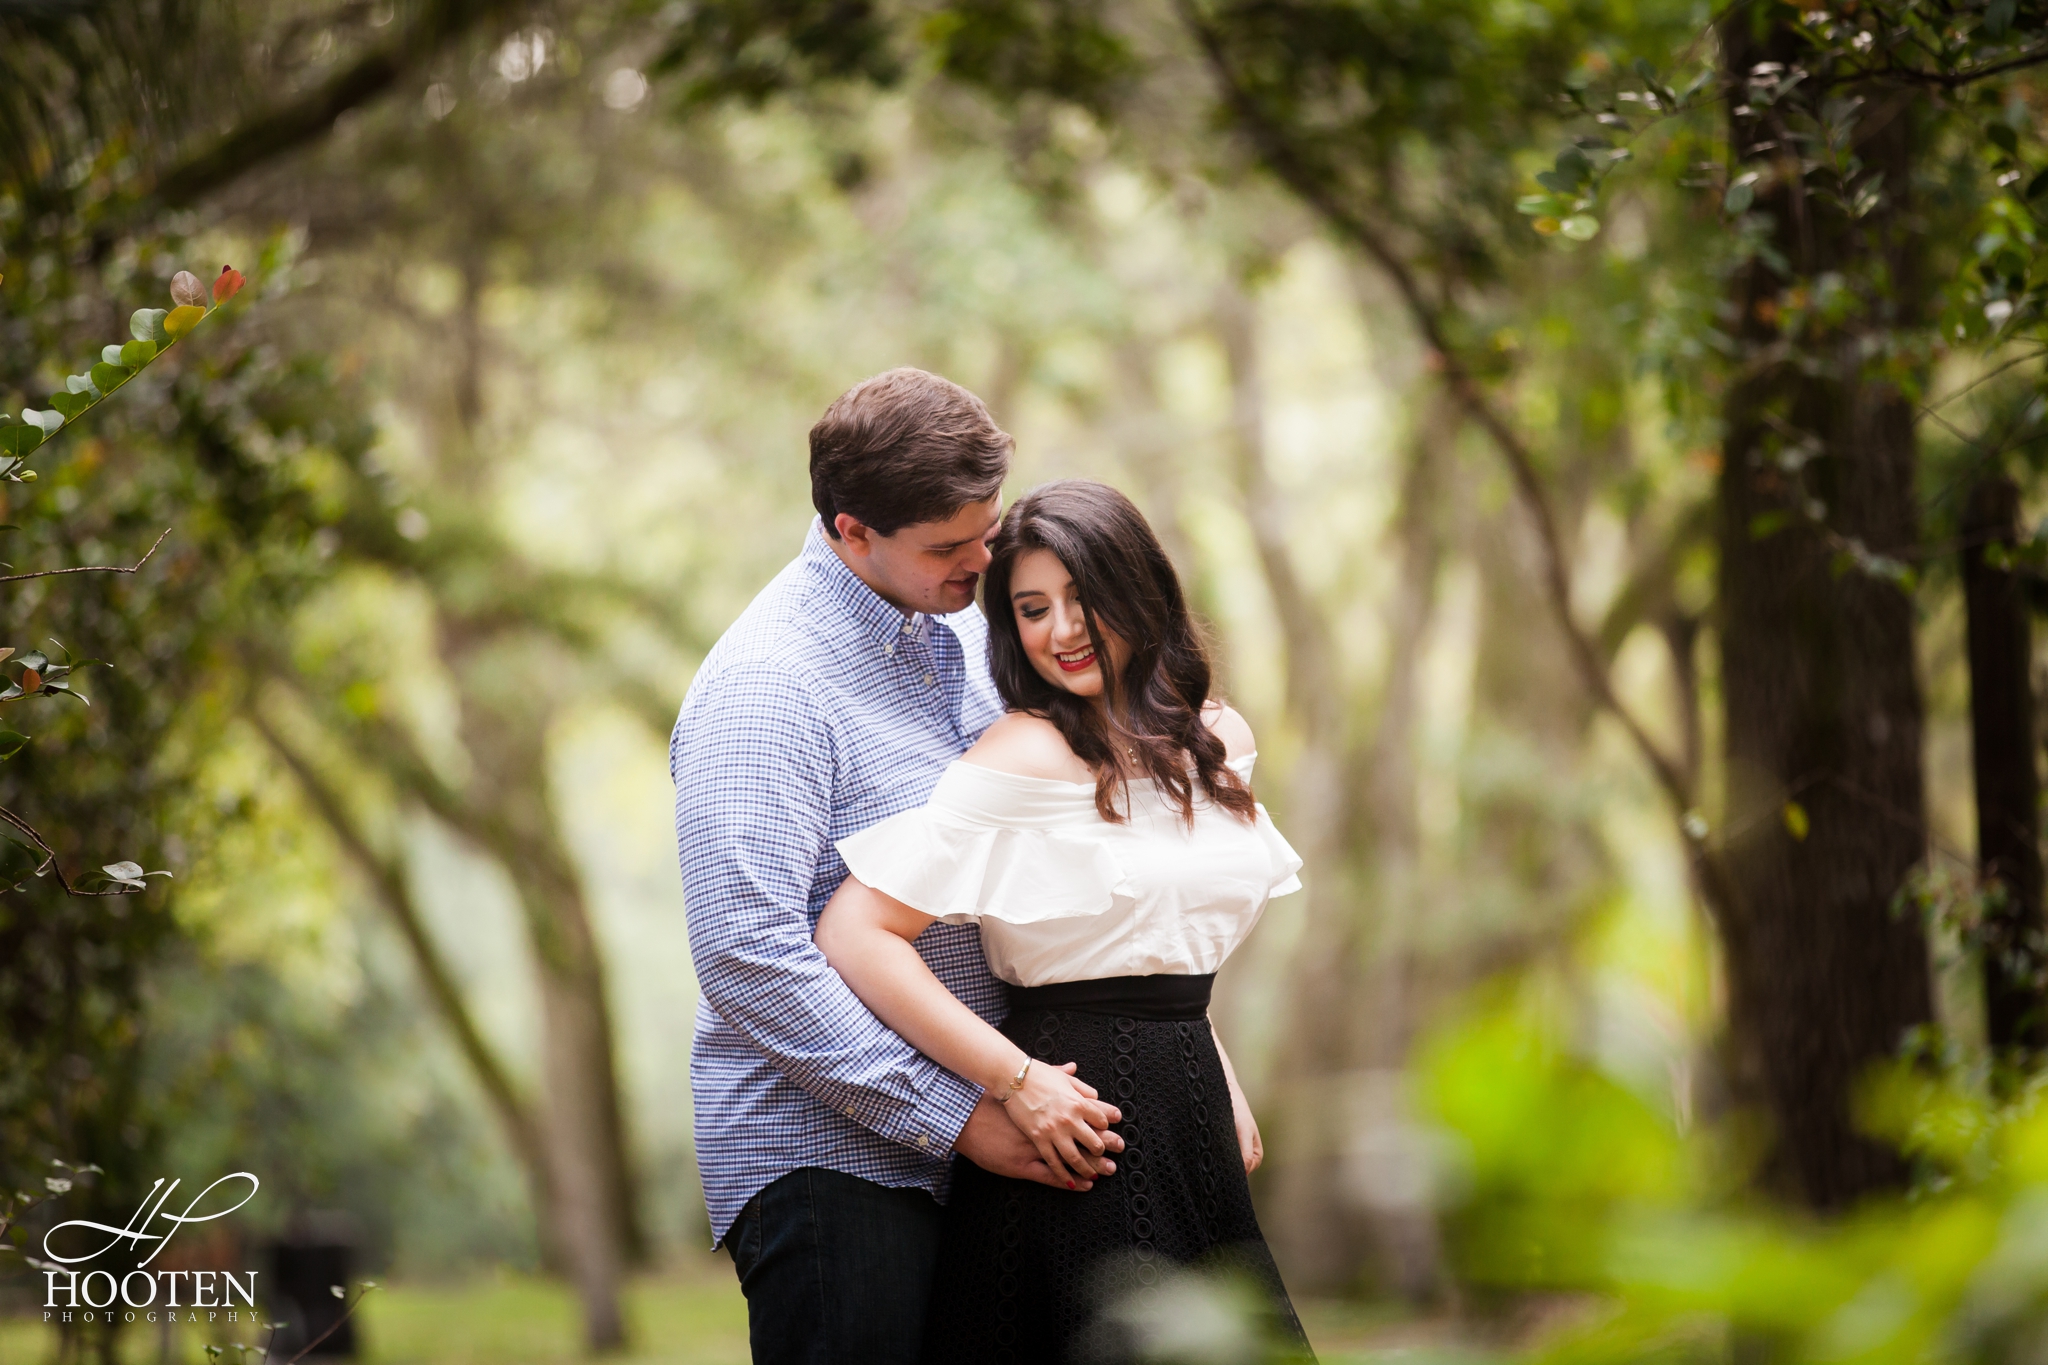 Tree-Tops-Park-Engagement-Session-Hooten Photography-7761.jpg